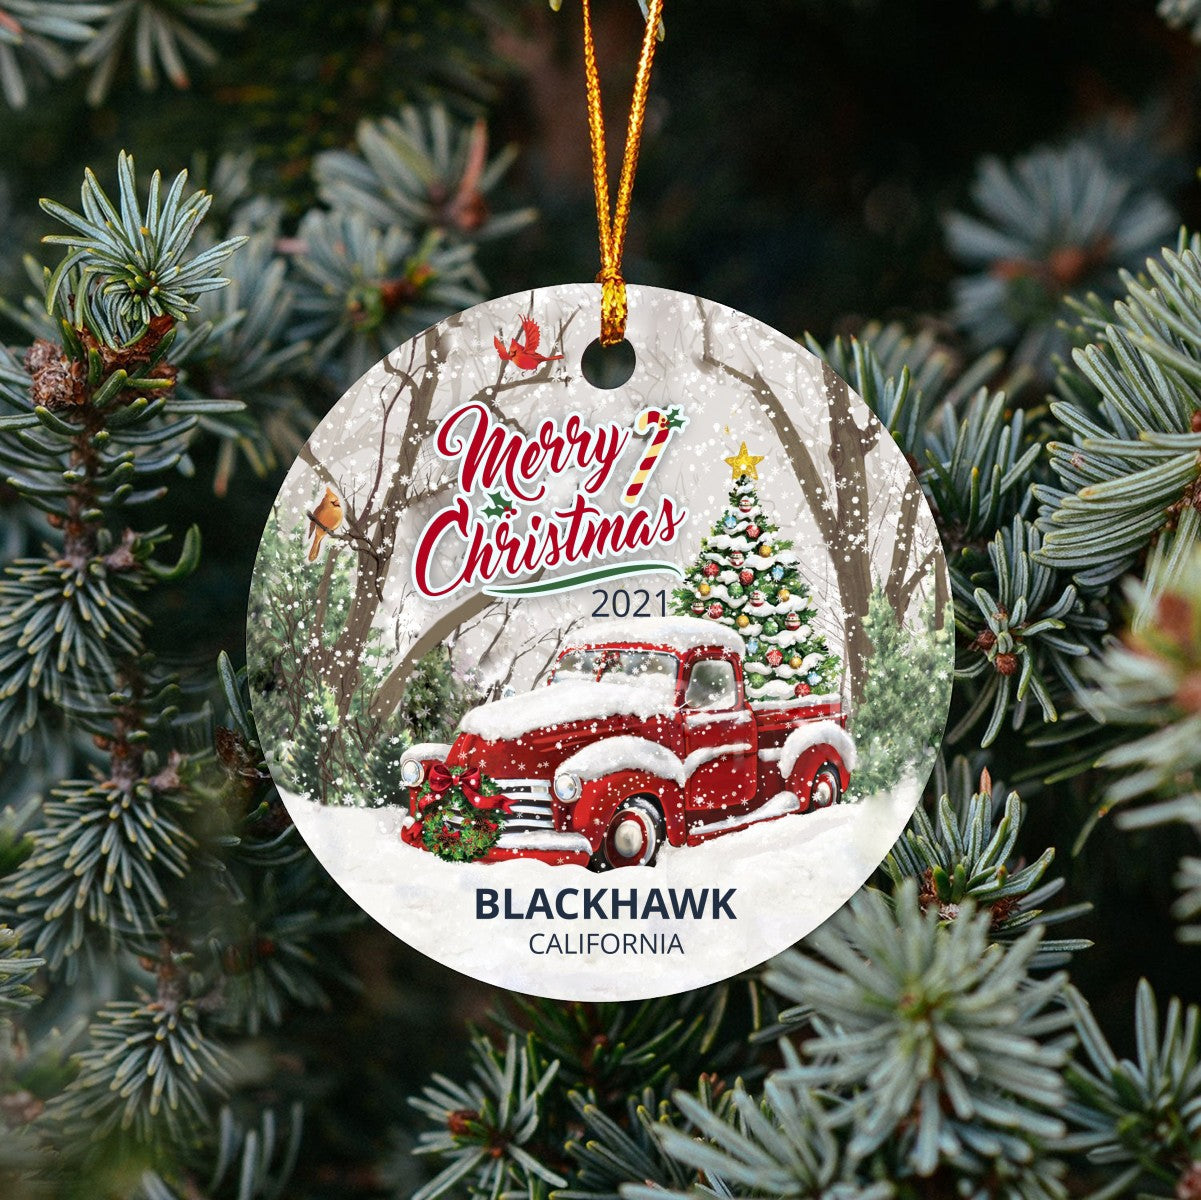 Christmas Tree Ornaments Blackhawk - Ornament With Name City, State Blackhawk California CA Ornament - Red Truck Xmas Ornaments 3'' Plastic Gift For Family, Friend And Housewarming